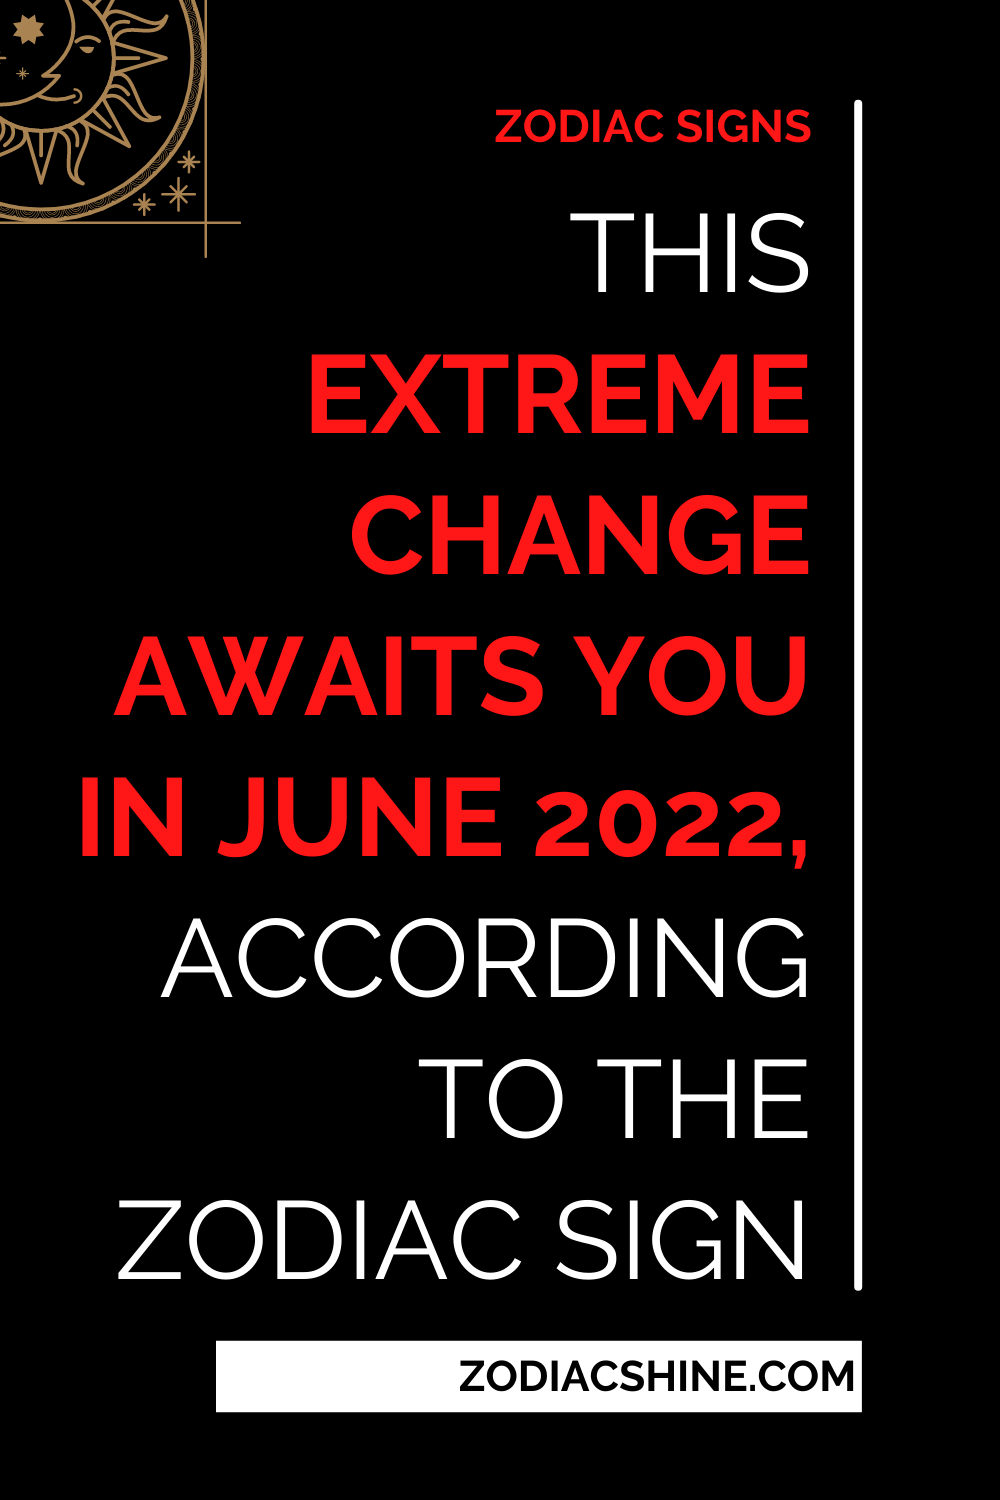 This Extreme Change Awaits You In June 2022 According To The Zodiac Sign